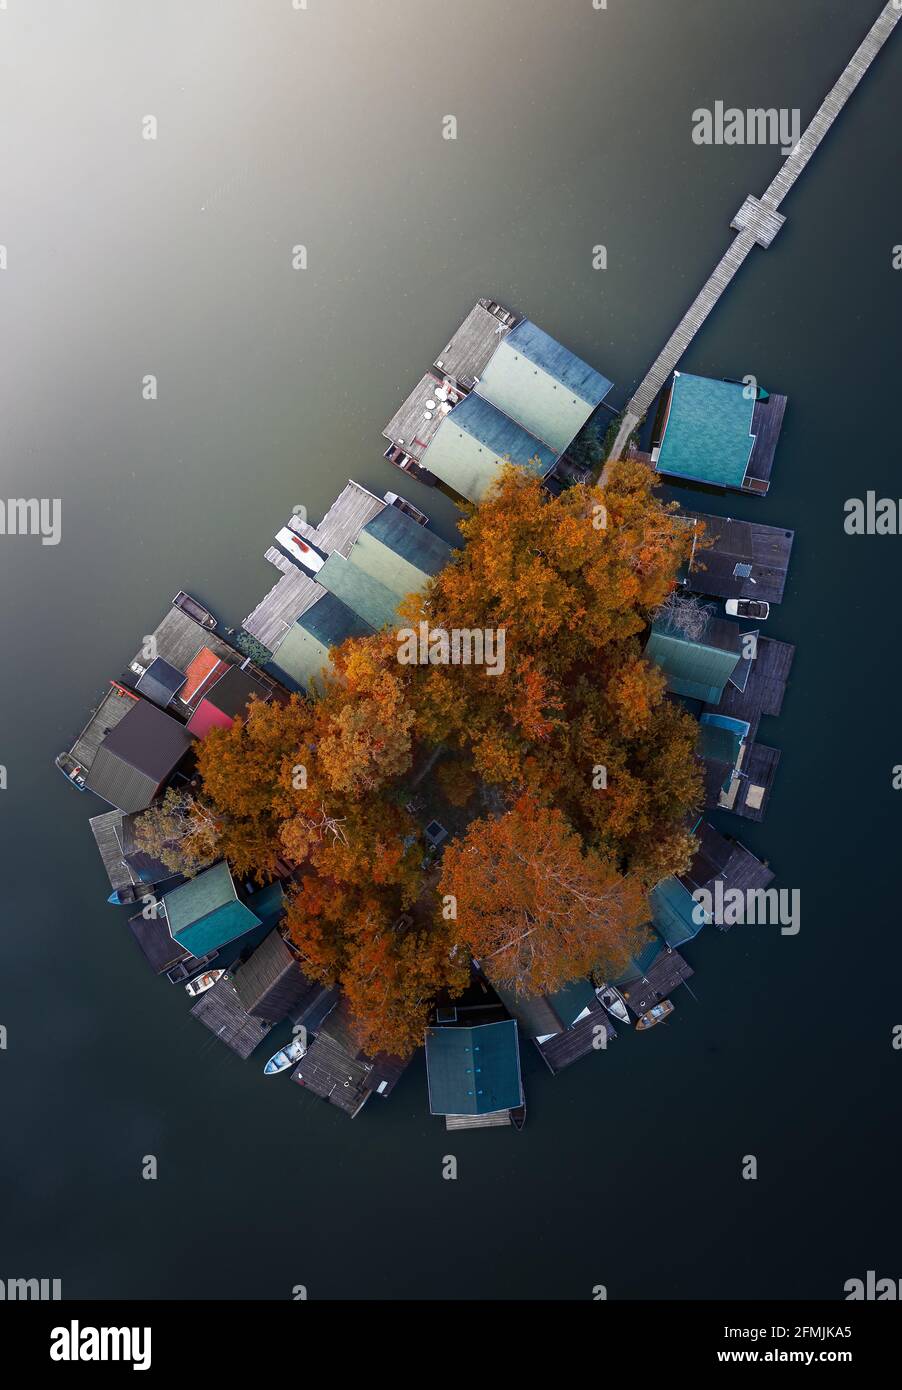 Tata, Hungary - Aerial top down view of a small fishing island at Lake Derito (Derito-to) with autumn leaves and foliage at sunset. The lake can be fo Stock Photo